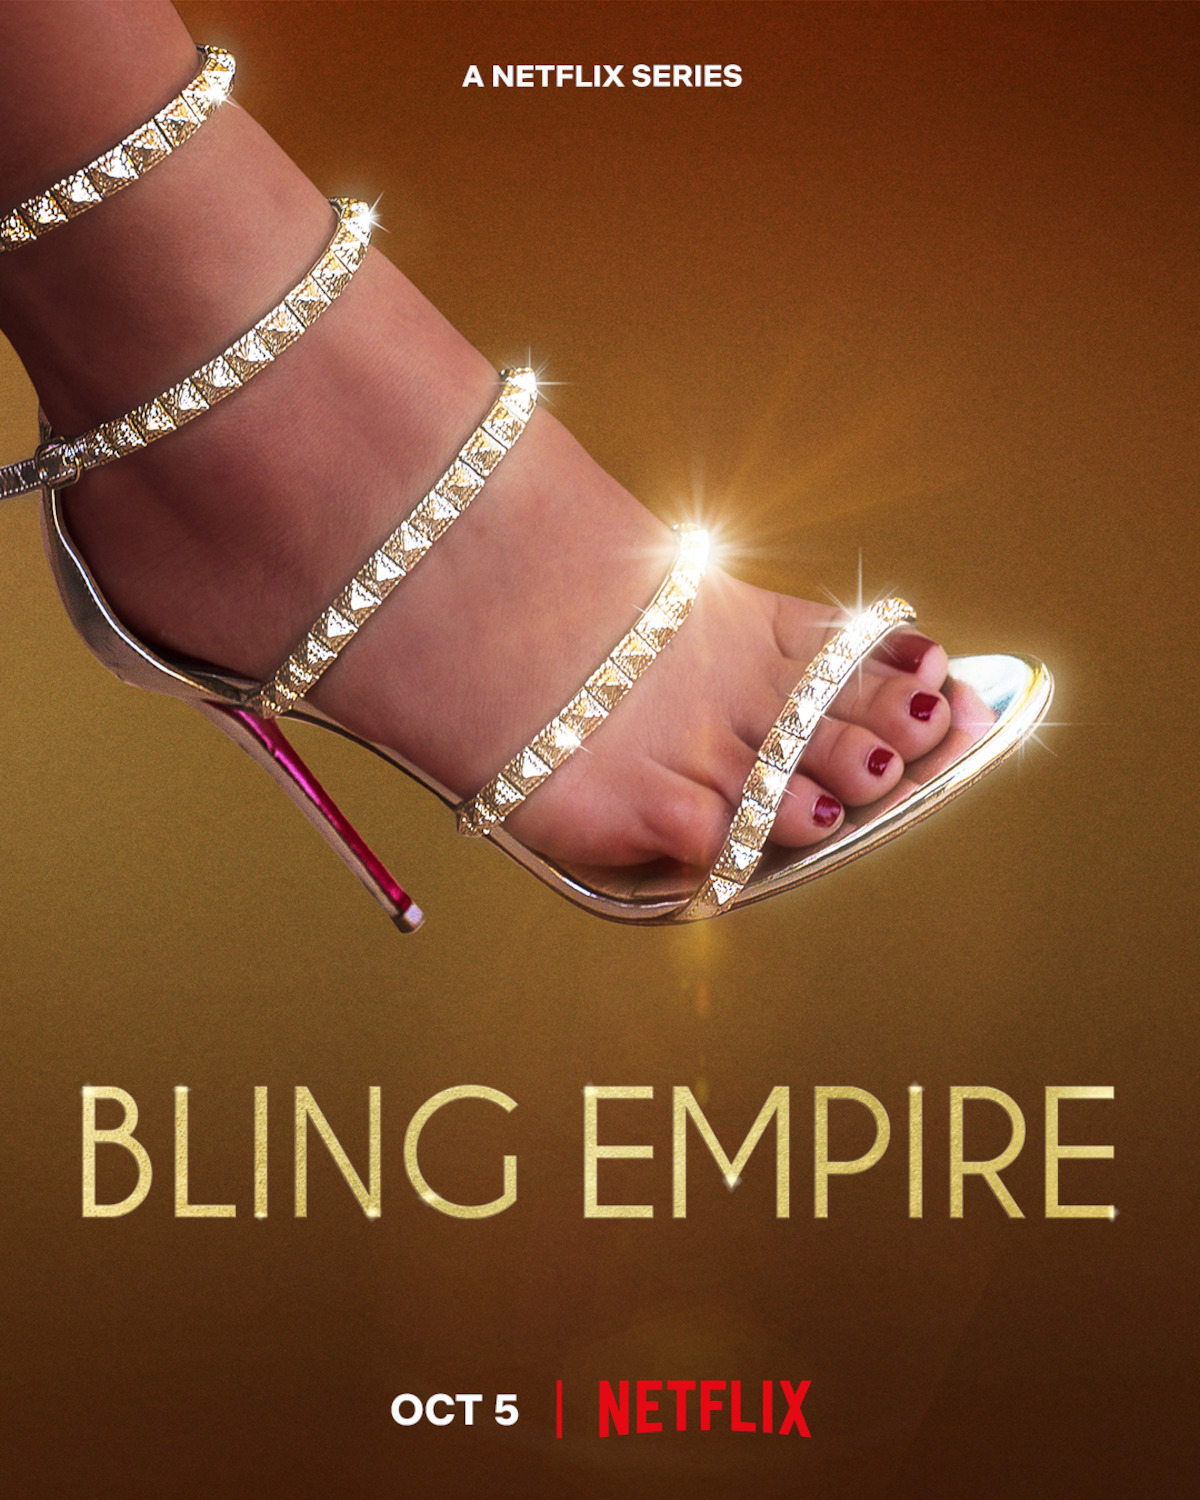 Bling Empire Star Kelly Mi Li's Jewelry Really Does Bring the